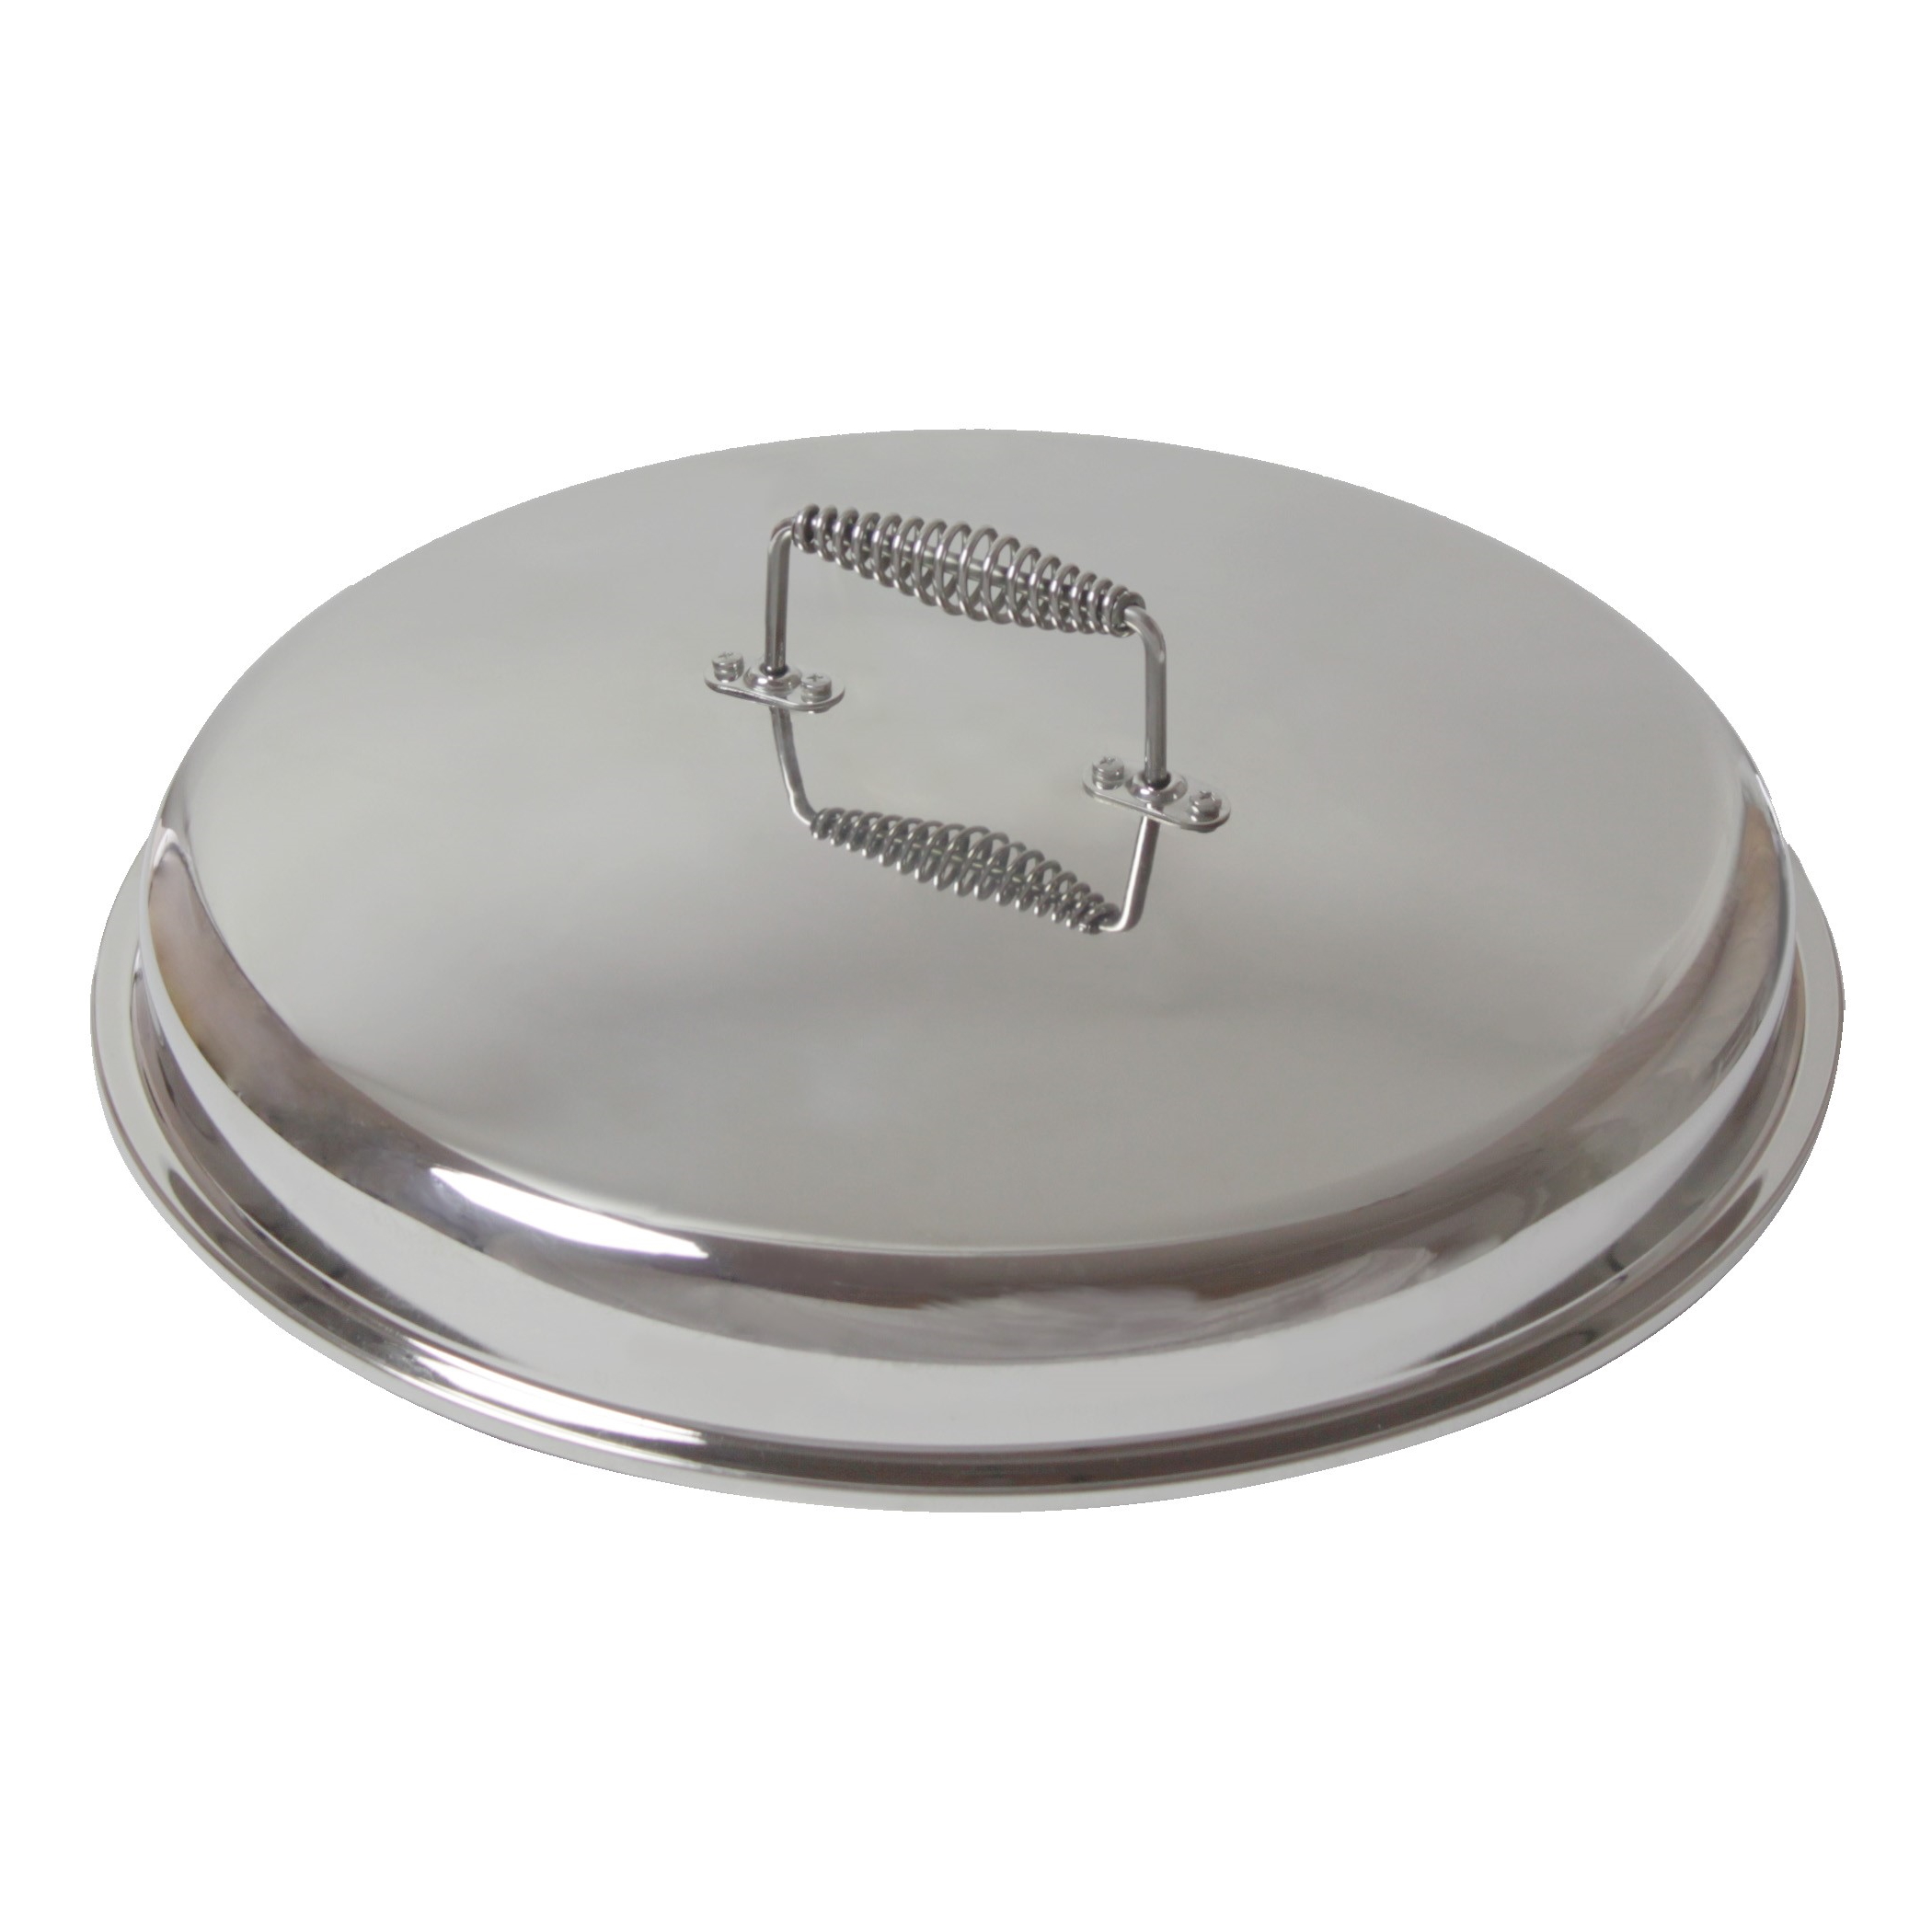 Lid for Griddle Pan 48 cm Stainless Steel